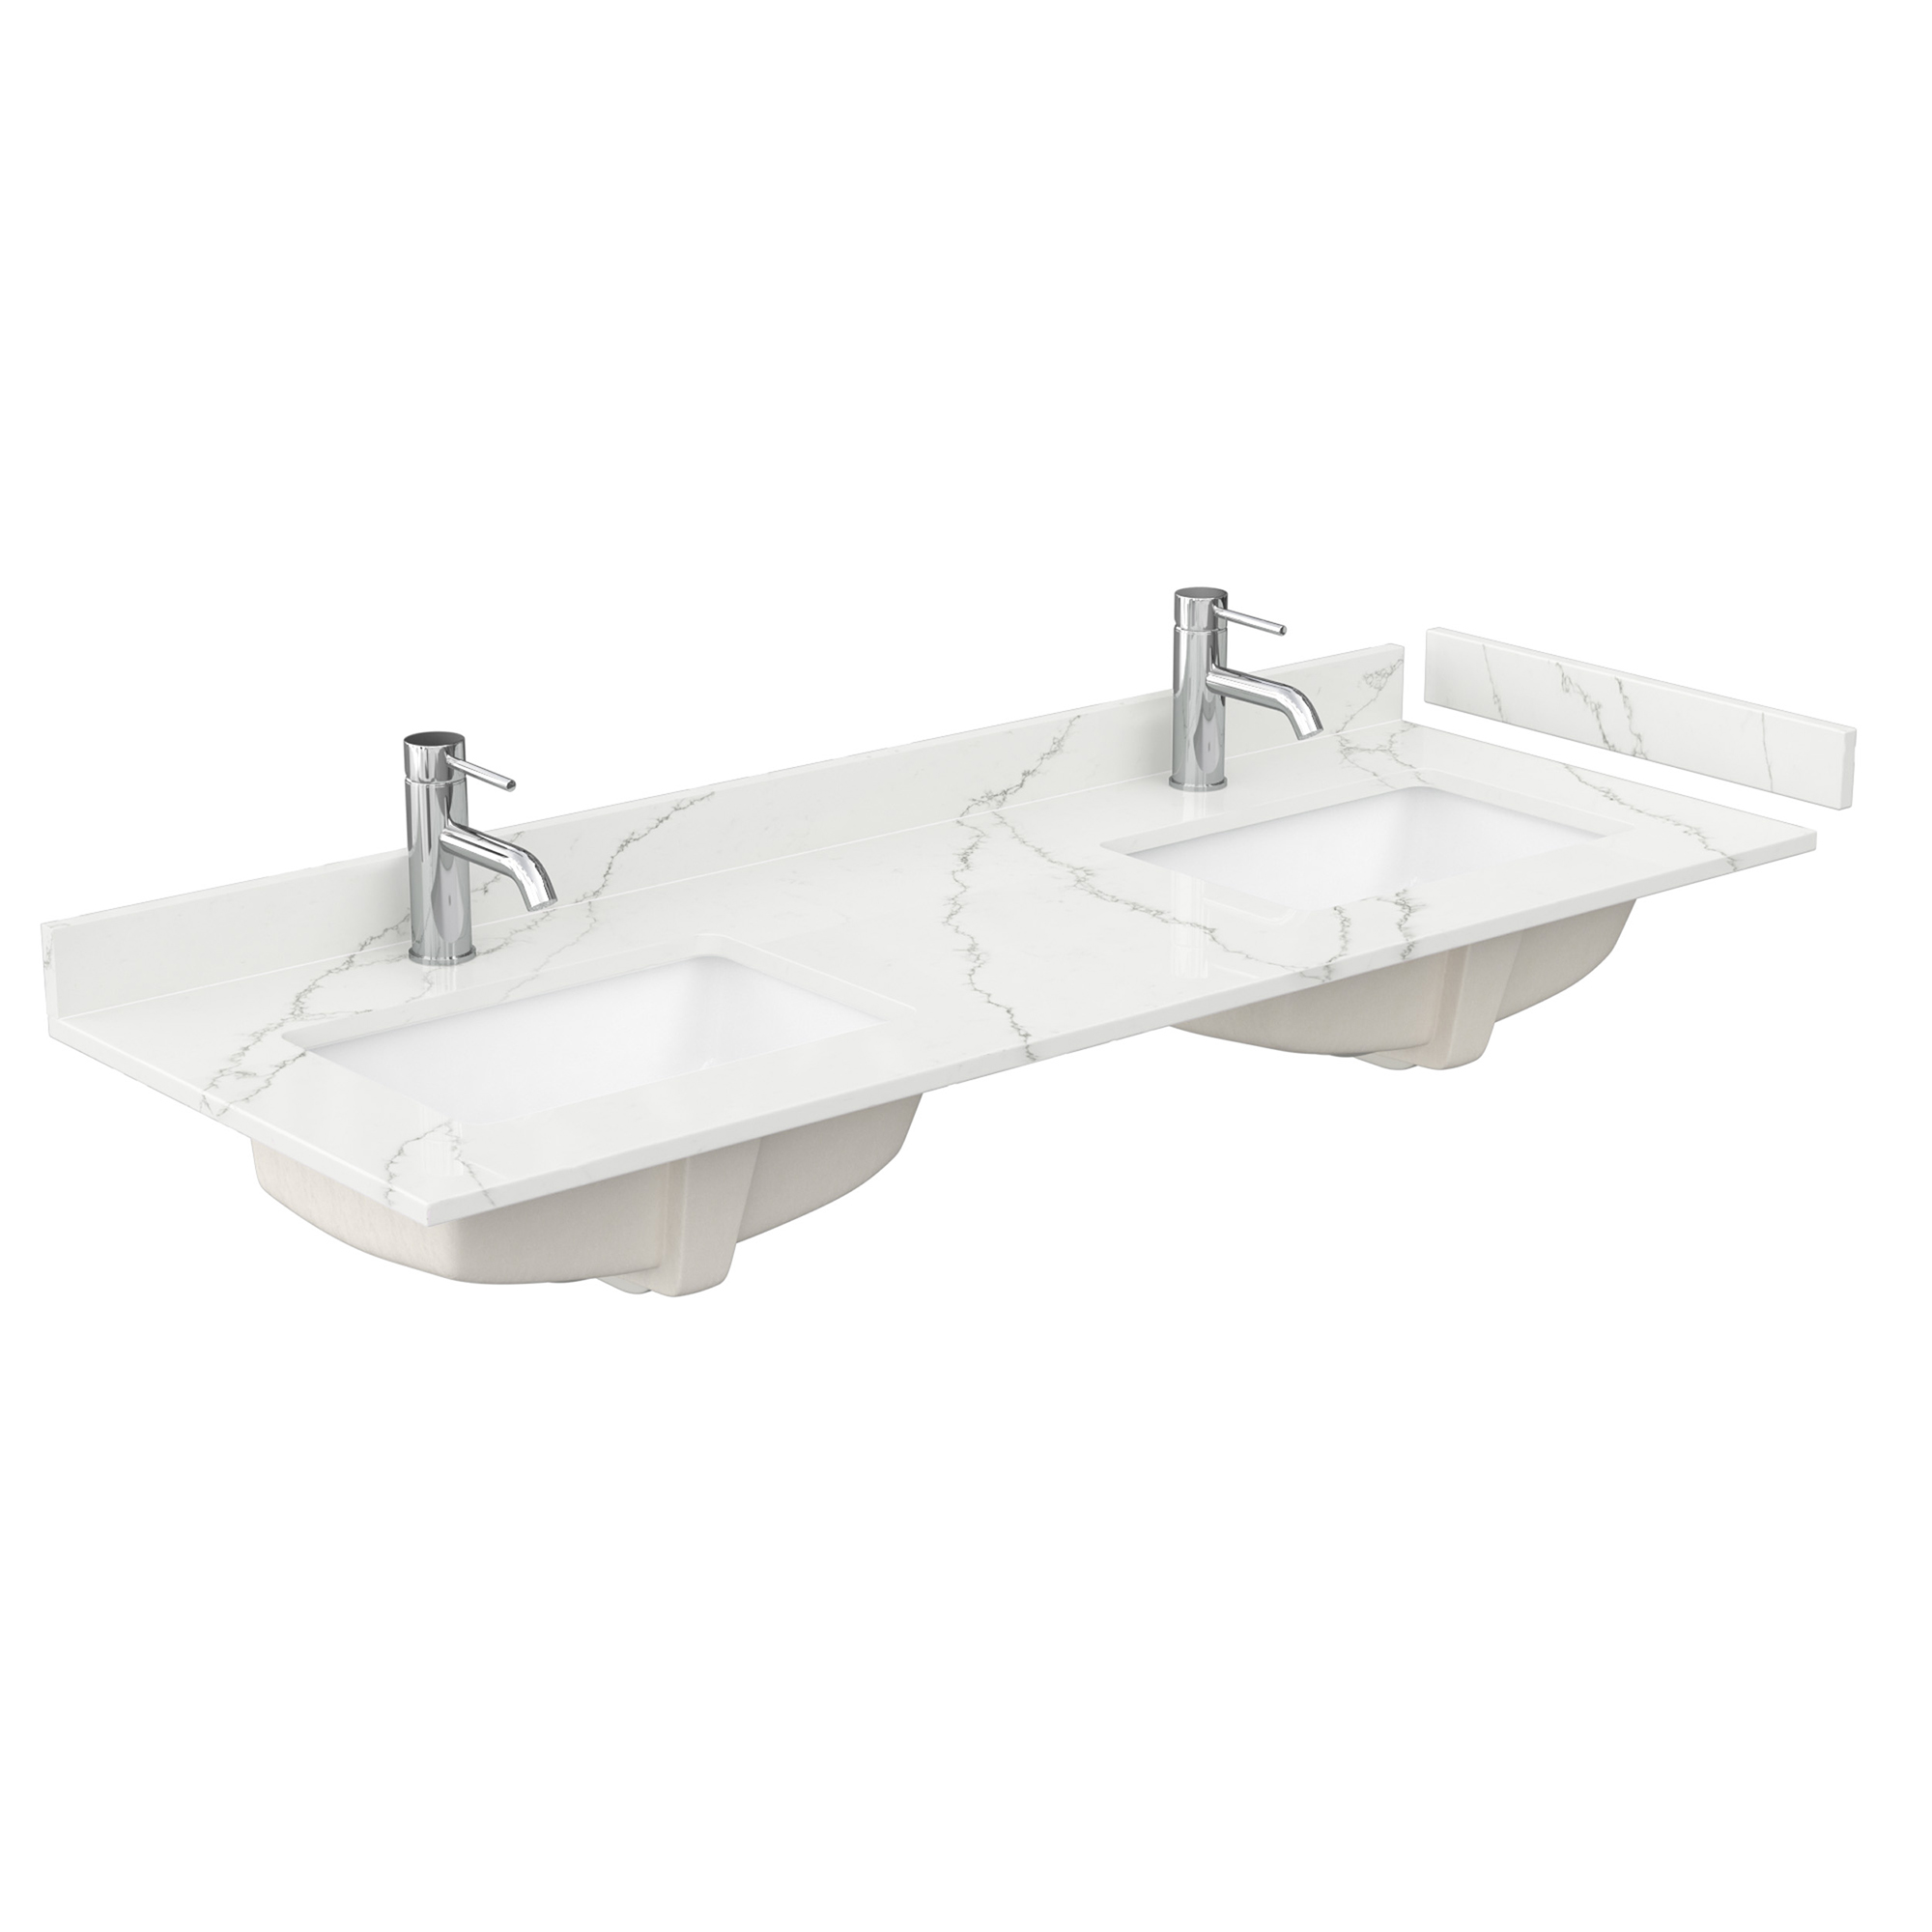 60" Double Countertop - Giotto Quartz (8066) with Undermount Square Sinks (1-Hole) - Includes Backsplash and Sidesplash WCFQC160DTOPUNSGT